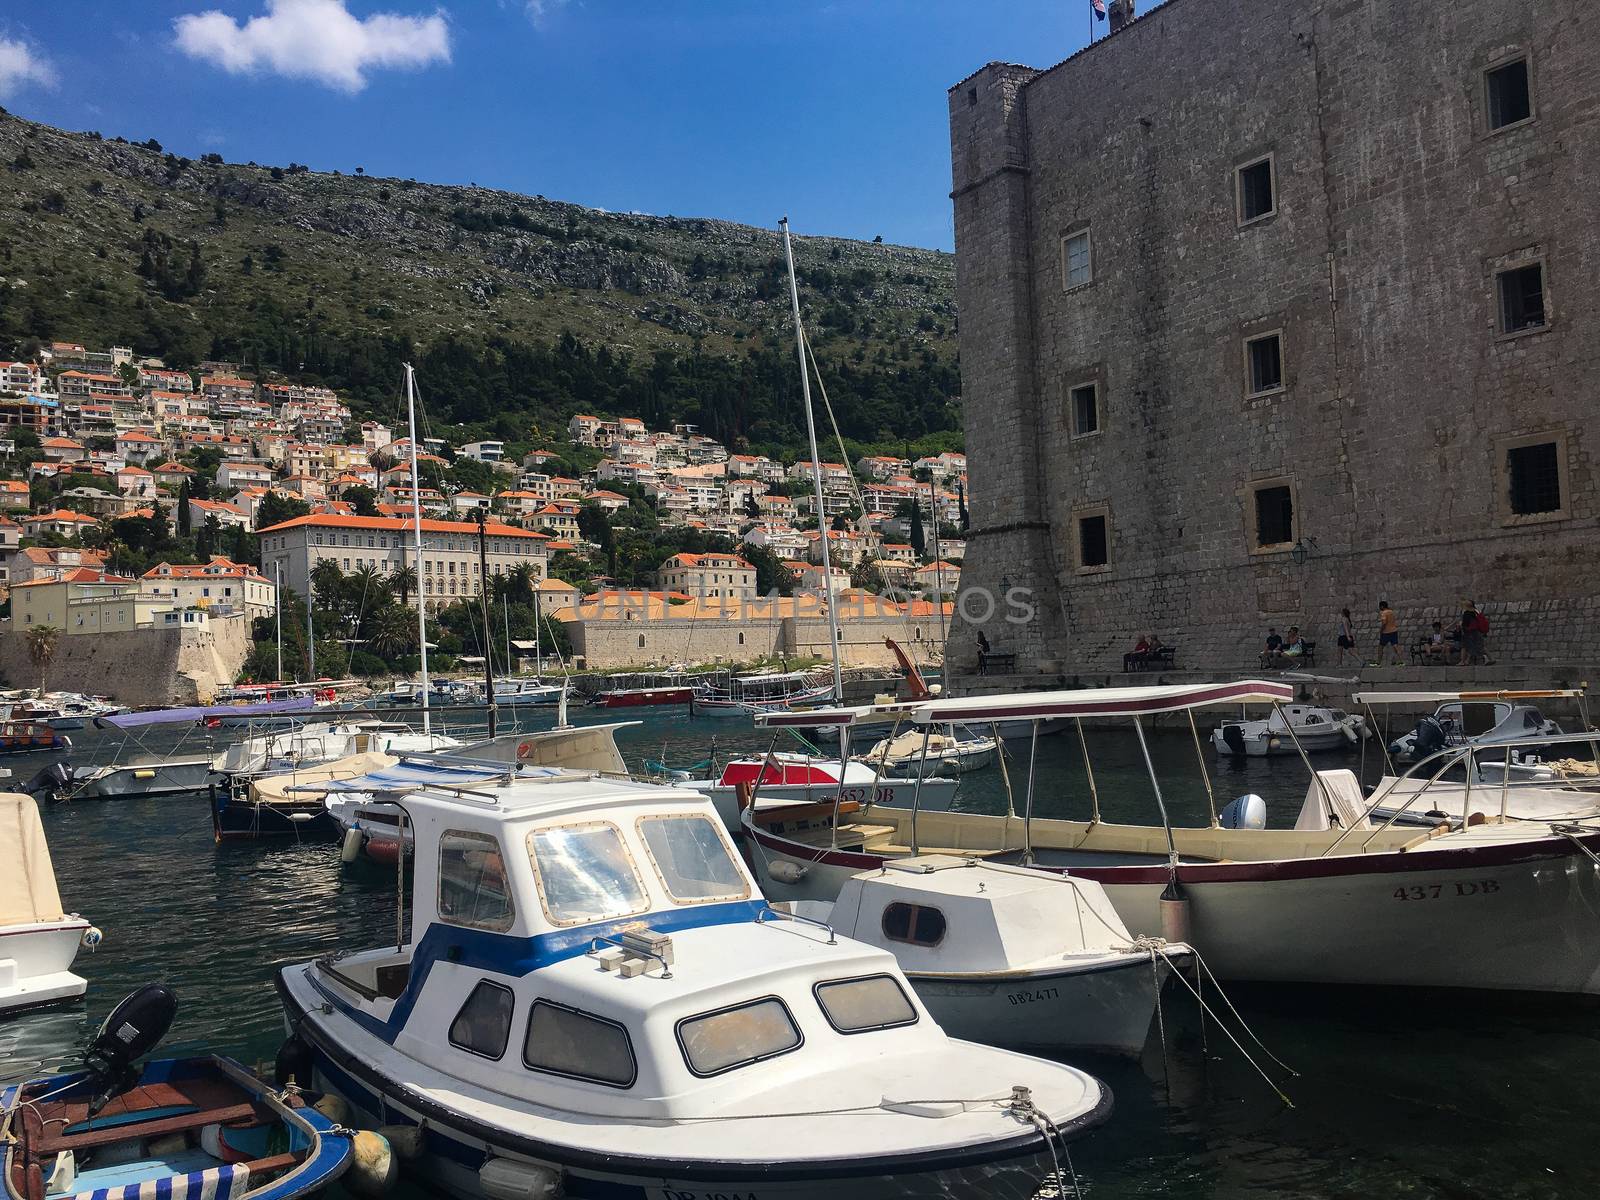 view from the boat to Dubrovnik in Croatia during the holidays